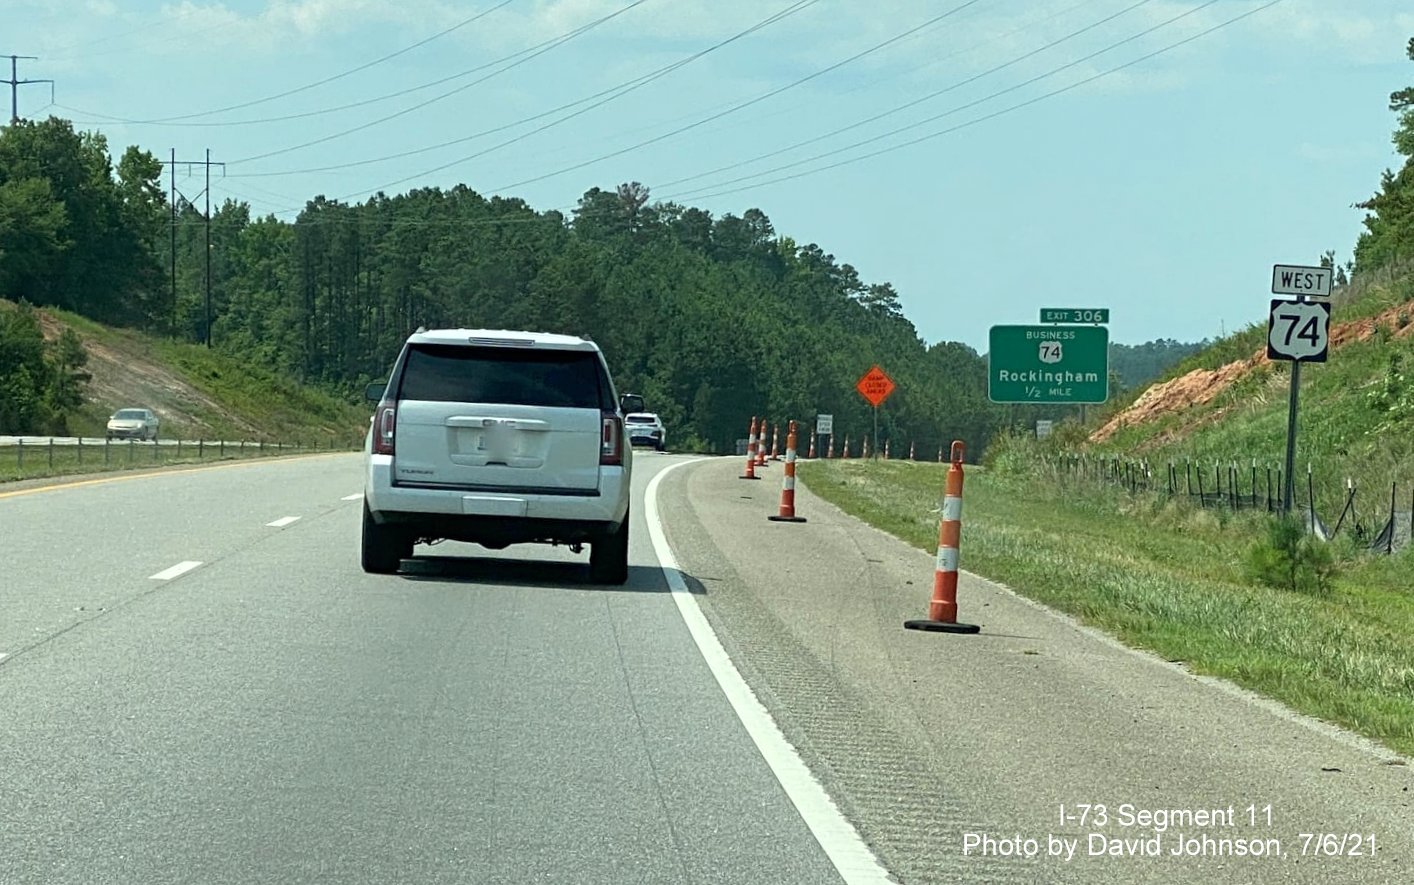 Image of start of construction zone for future interchange with I-73/I-74 Rockingham Bypass as seen from 
        US 74 West, by David Johnson, July 2021